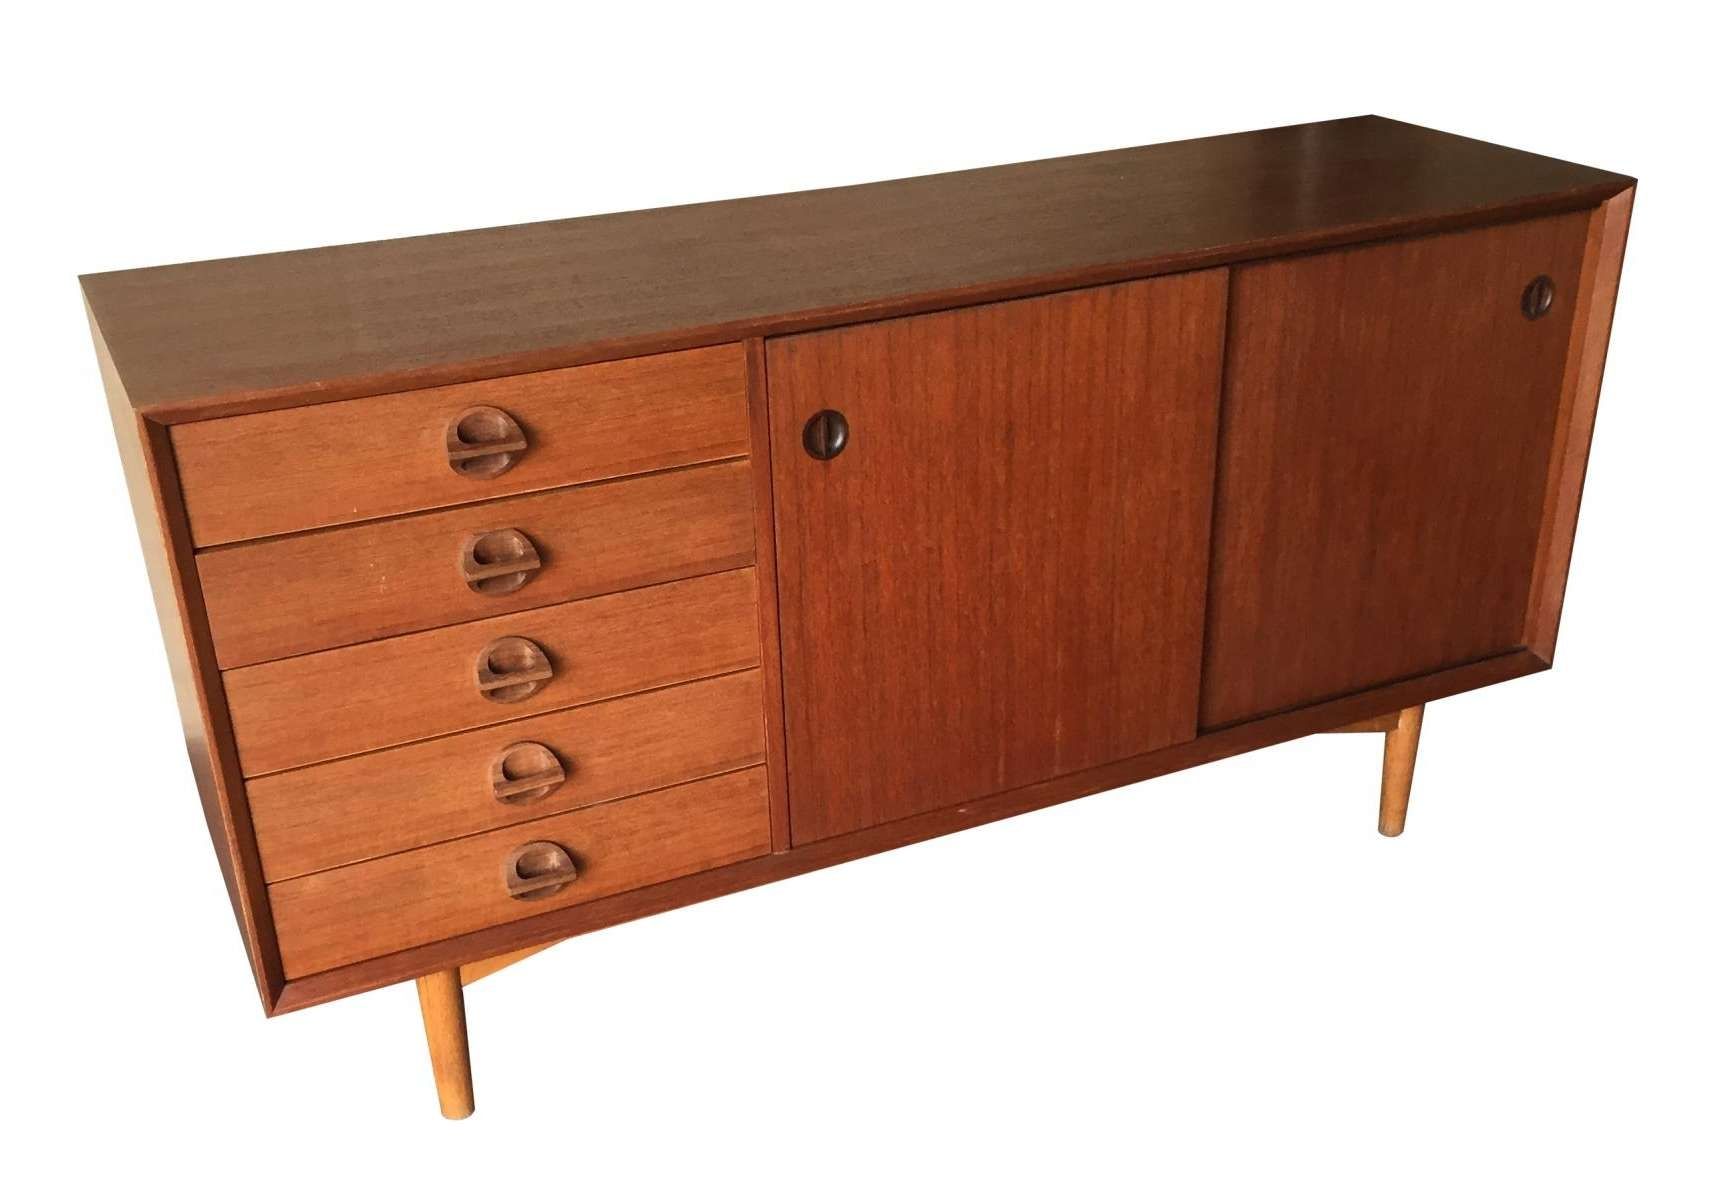 Vintage Sideboard With Sliding Doors, 1960s For Sale At Pamono Throughout 60 Inch Sideboards (View 16 of 20)